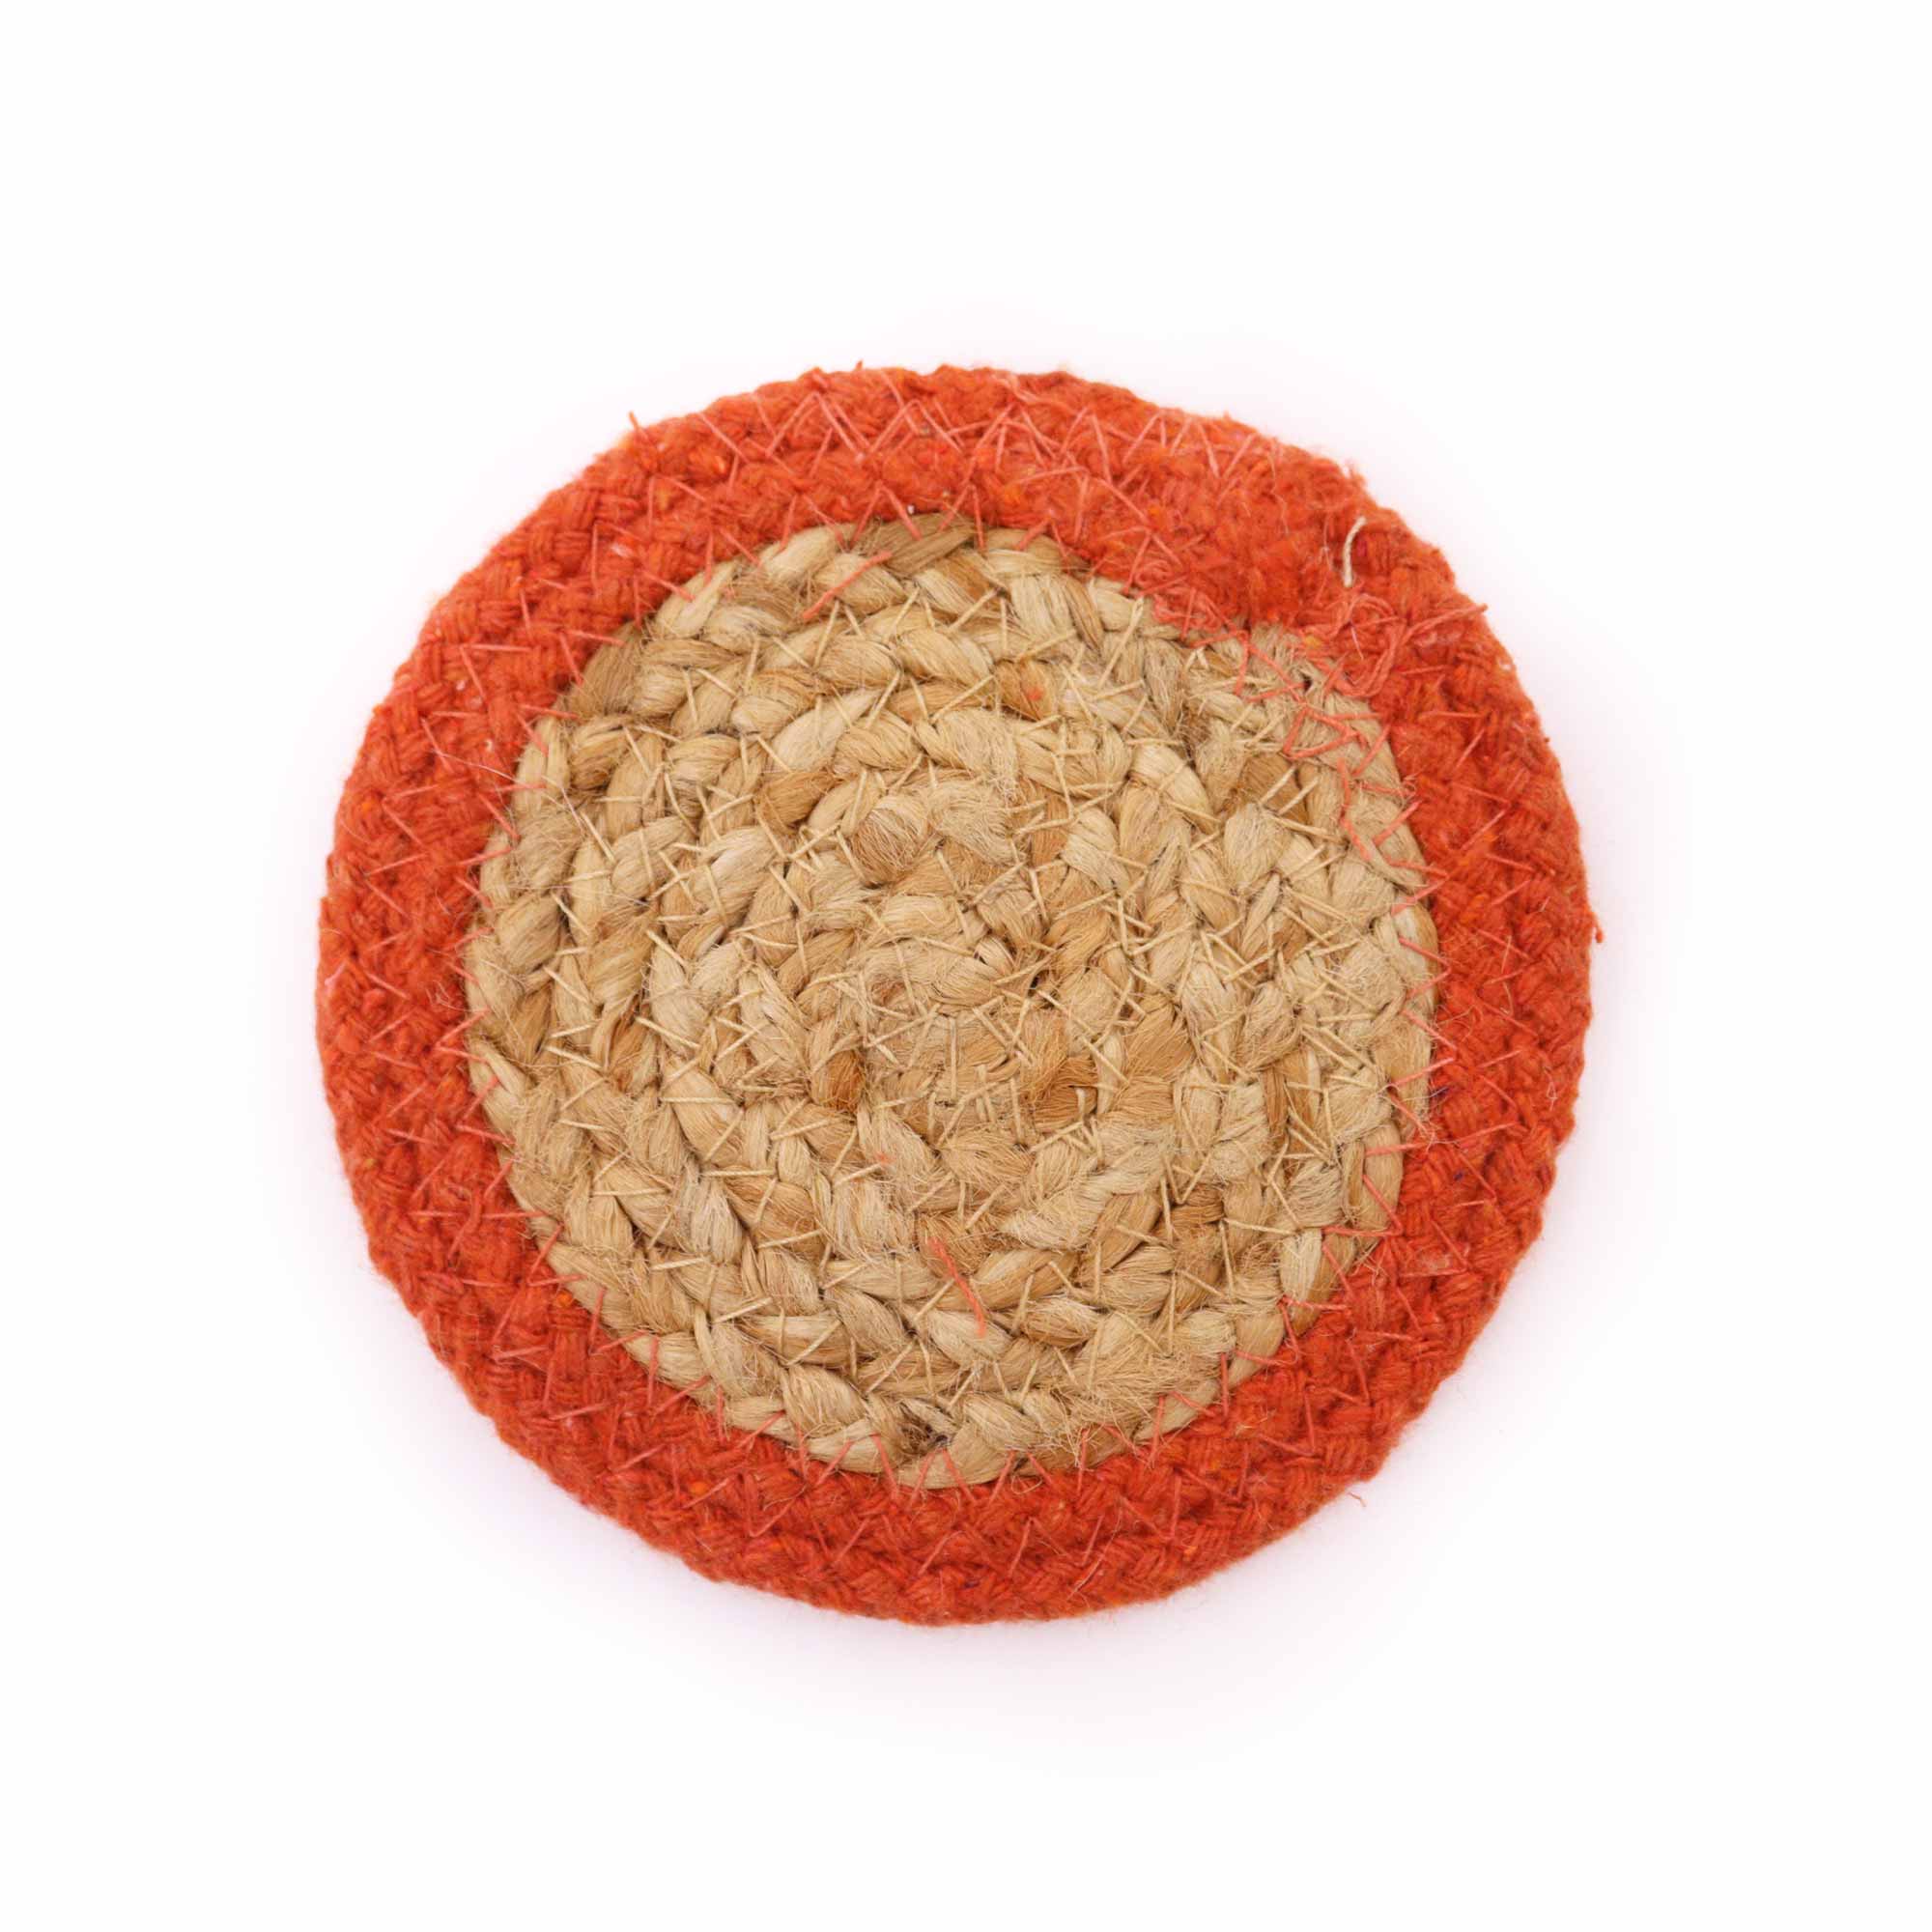 View Natural Coaster Jute Cotton 10cm set of 4 Clay Boarder information